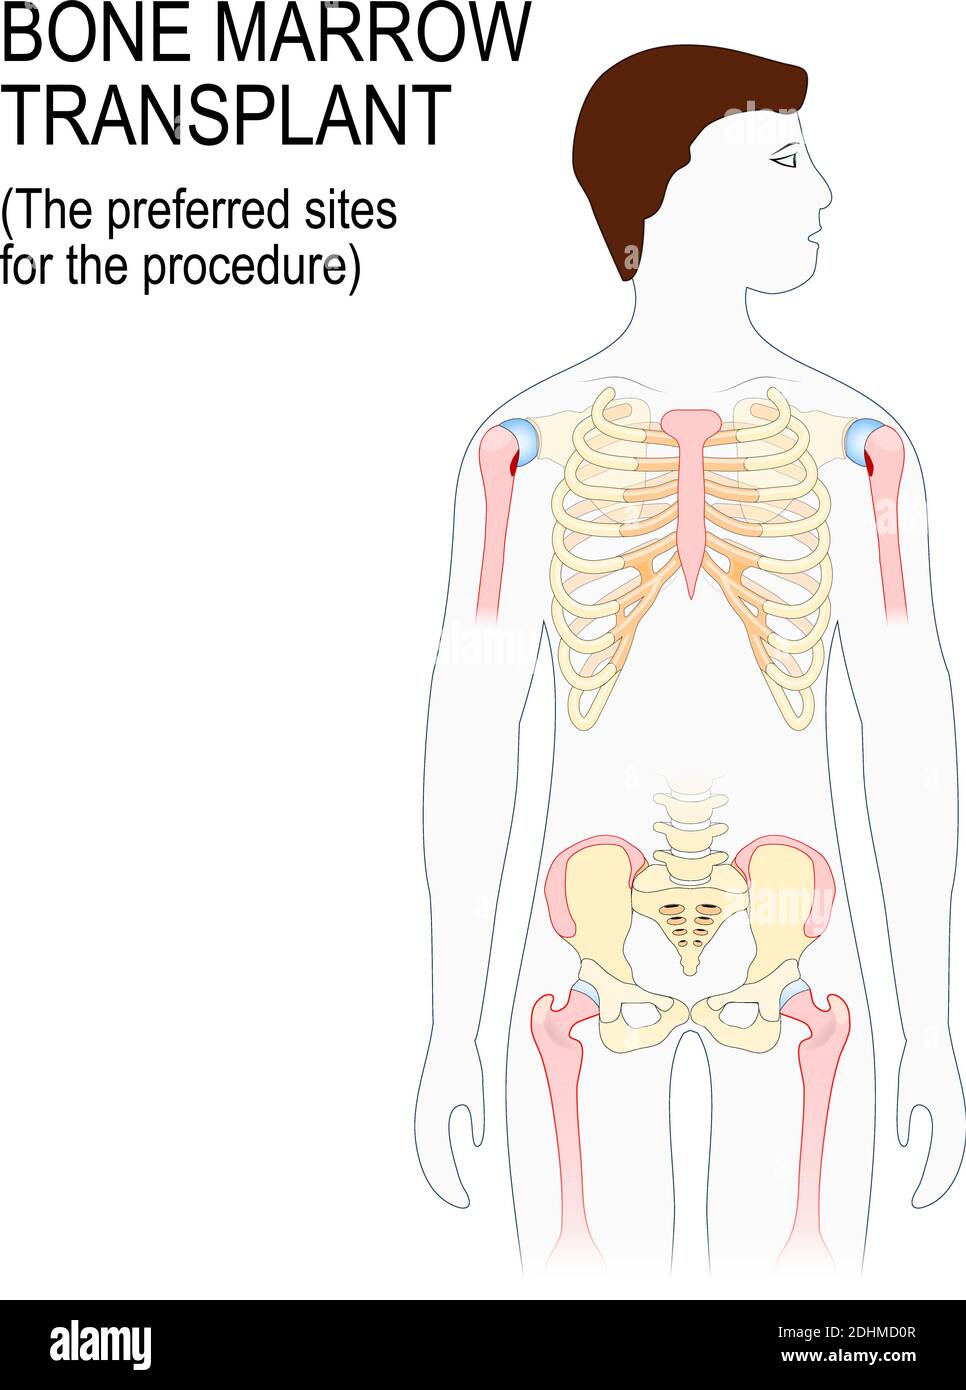 bone marrow transplant. The preferred sites for the transplantation procedure (Sternum, iliac crest, tibia or femur). man silhouette with highlighted Stock Vector